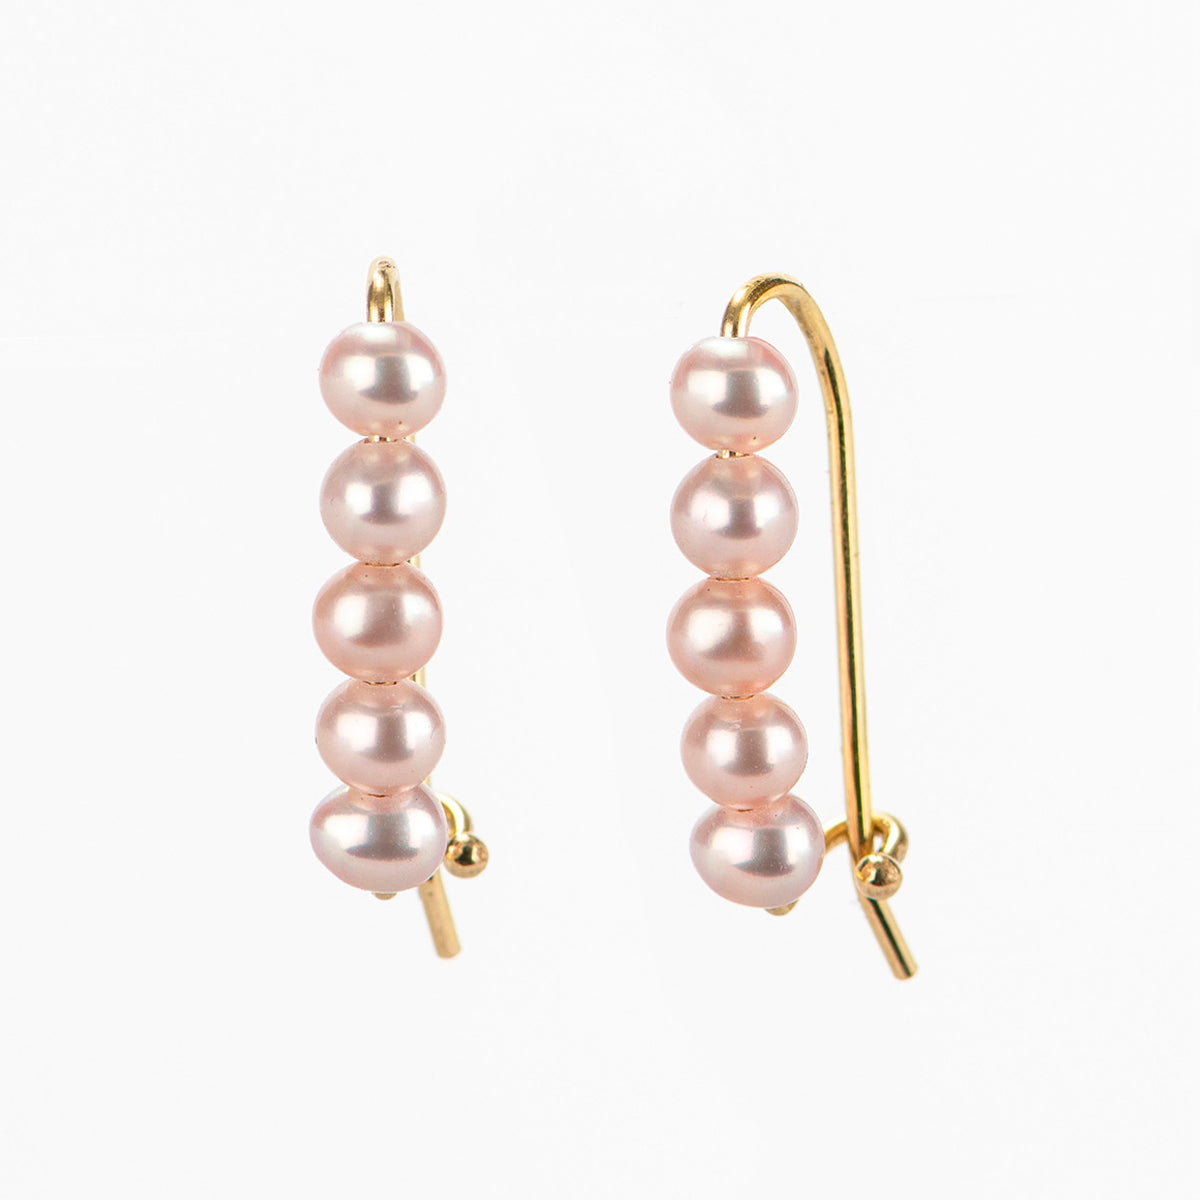 Pearls Safety Pin Earrings